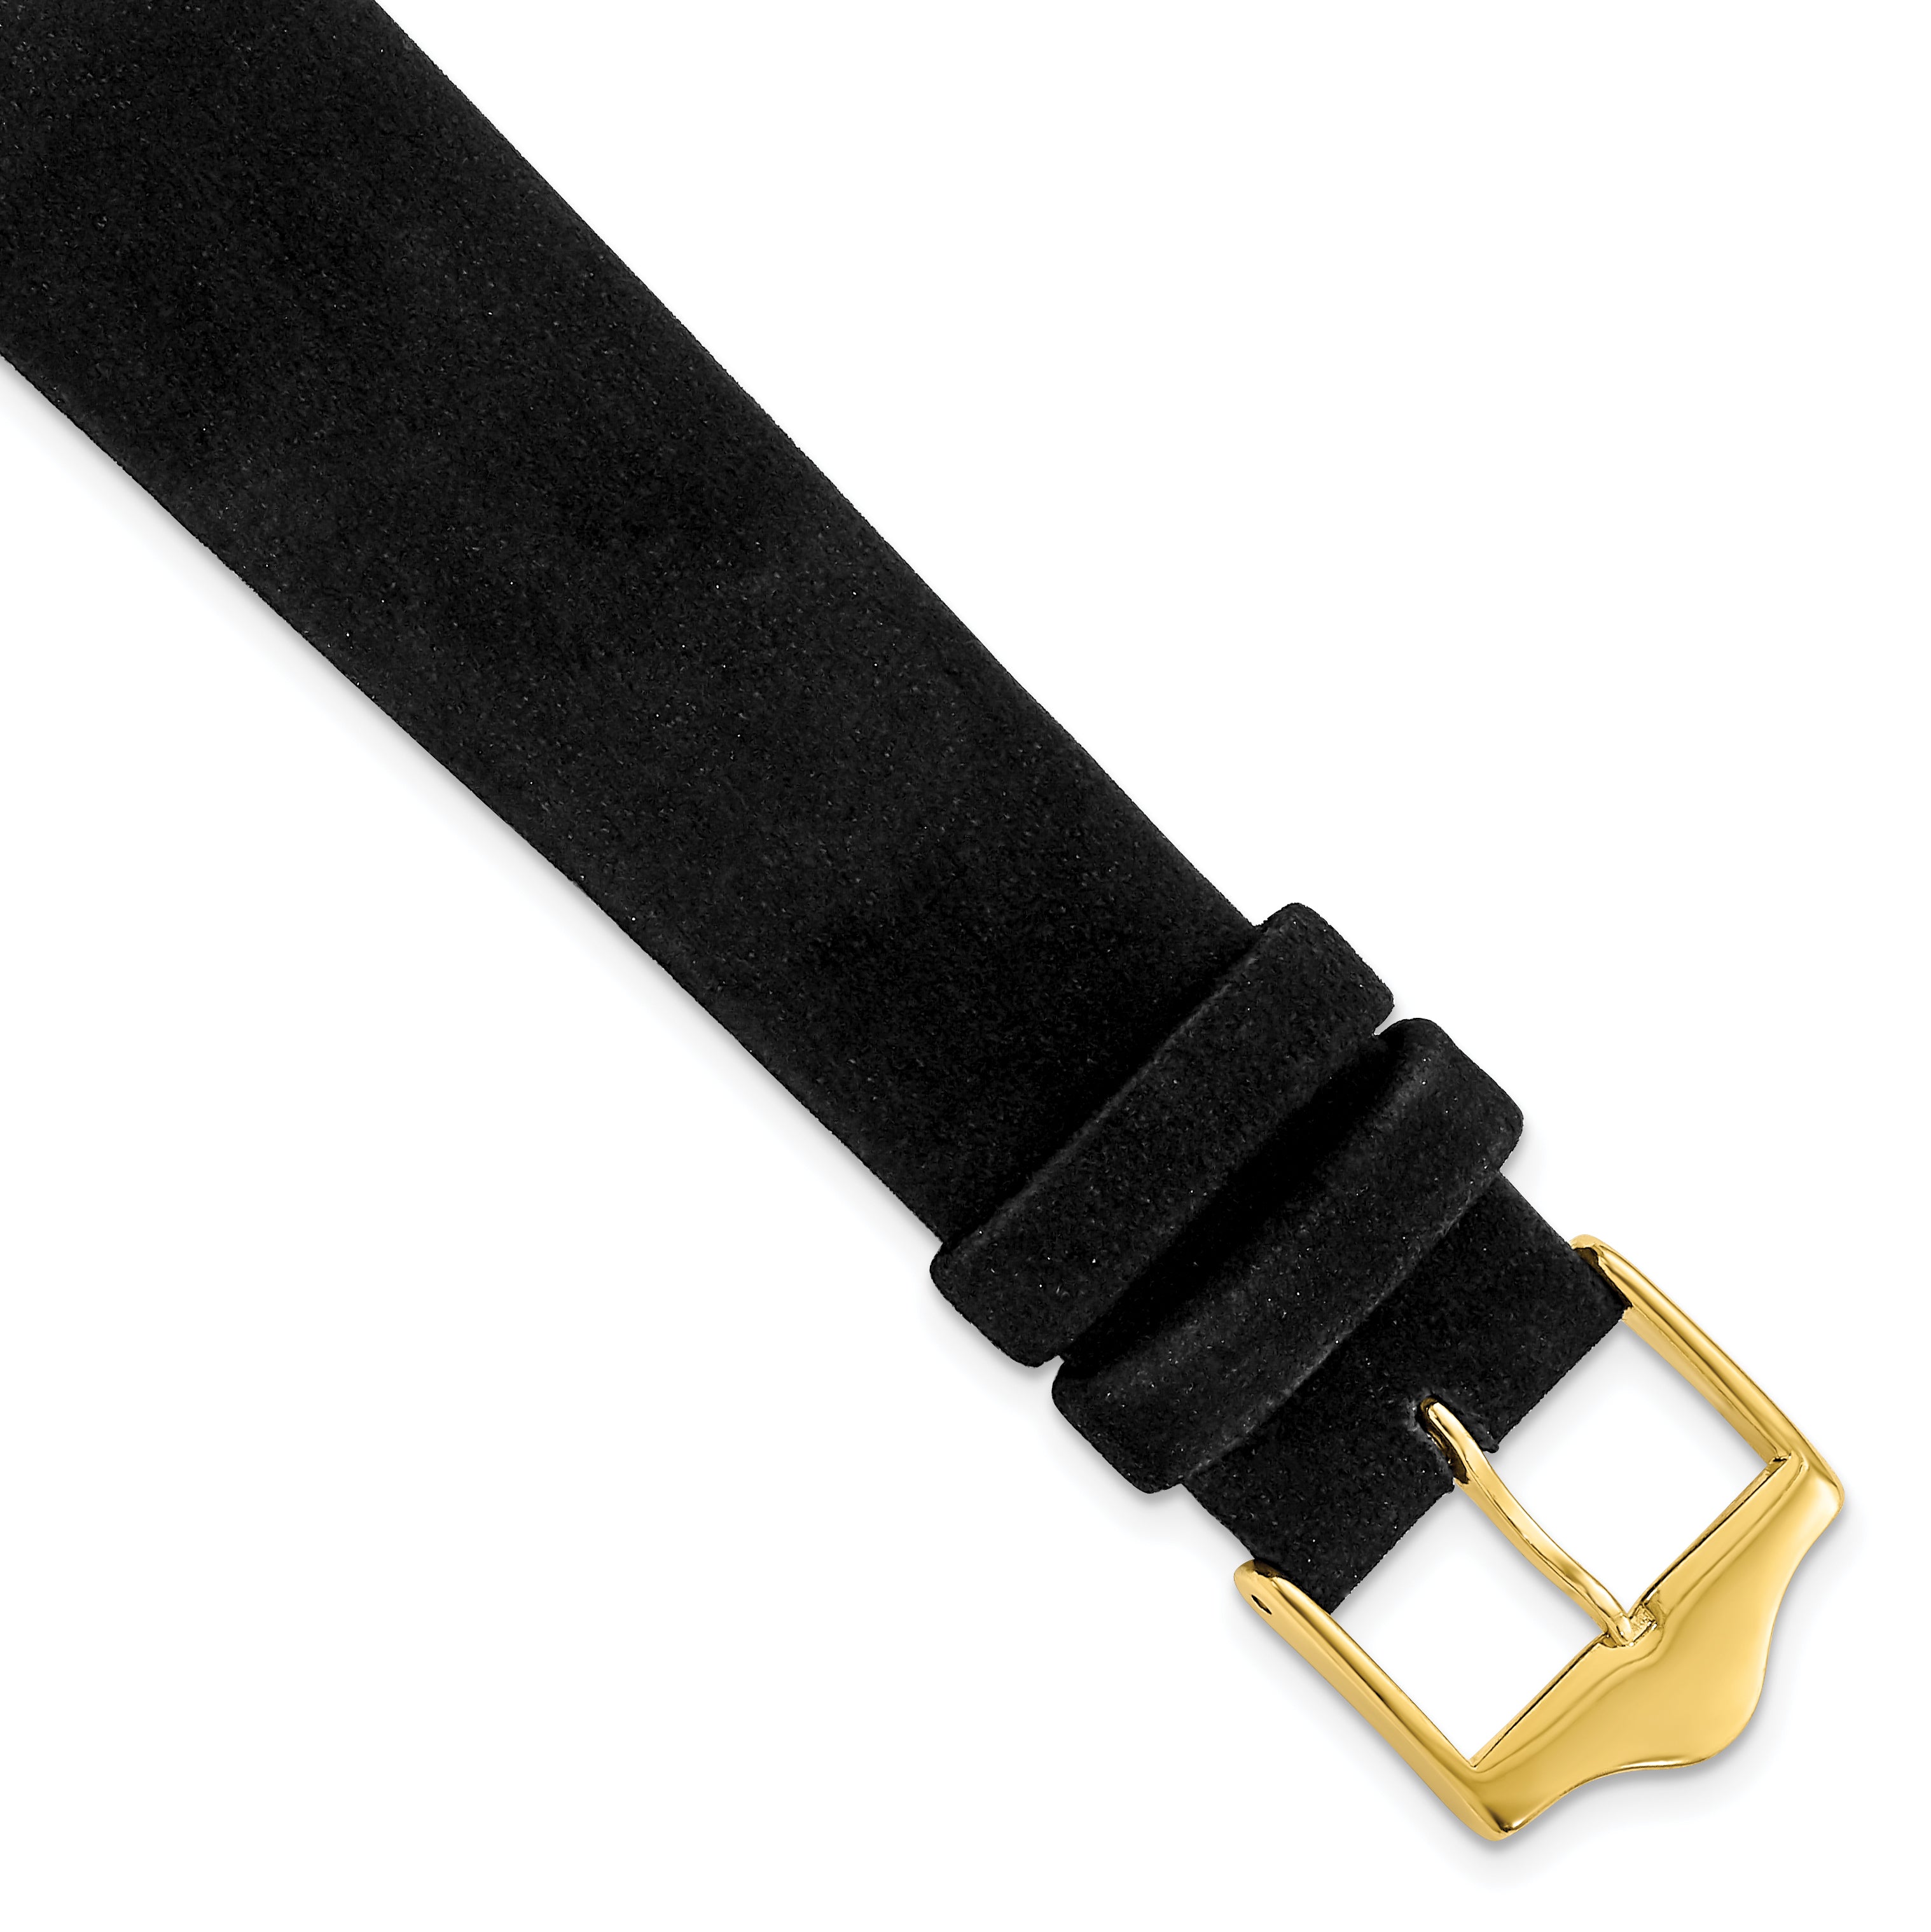 DeBeer 19mm Black Suede Flat Leather with Gold-tone Buckle 7.75 inch Watch Band